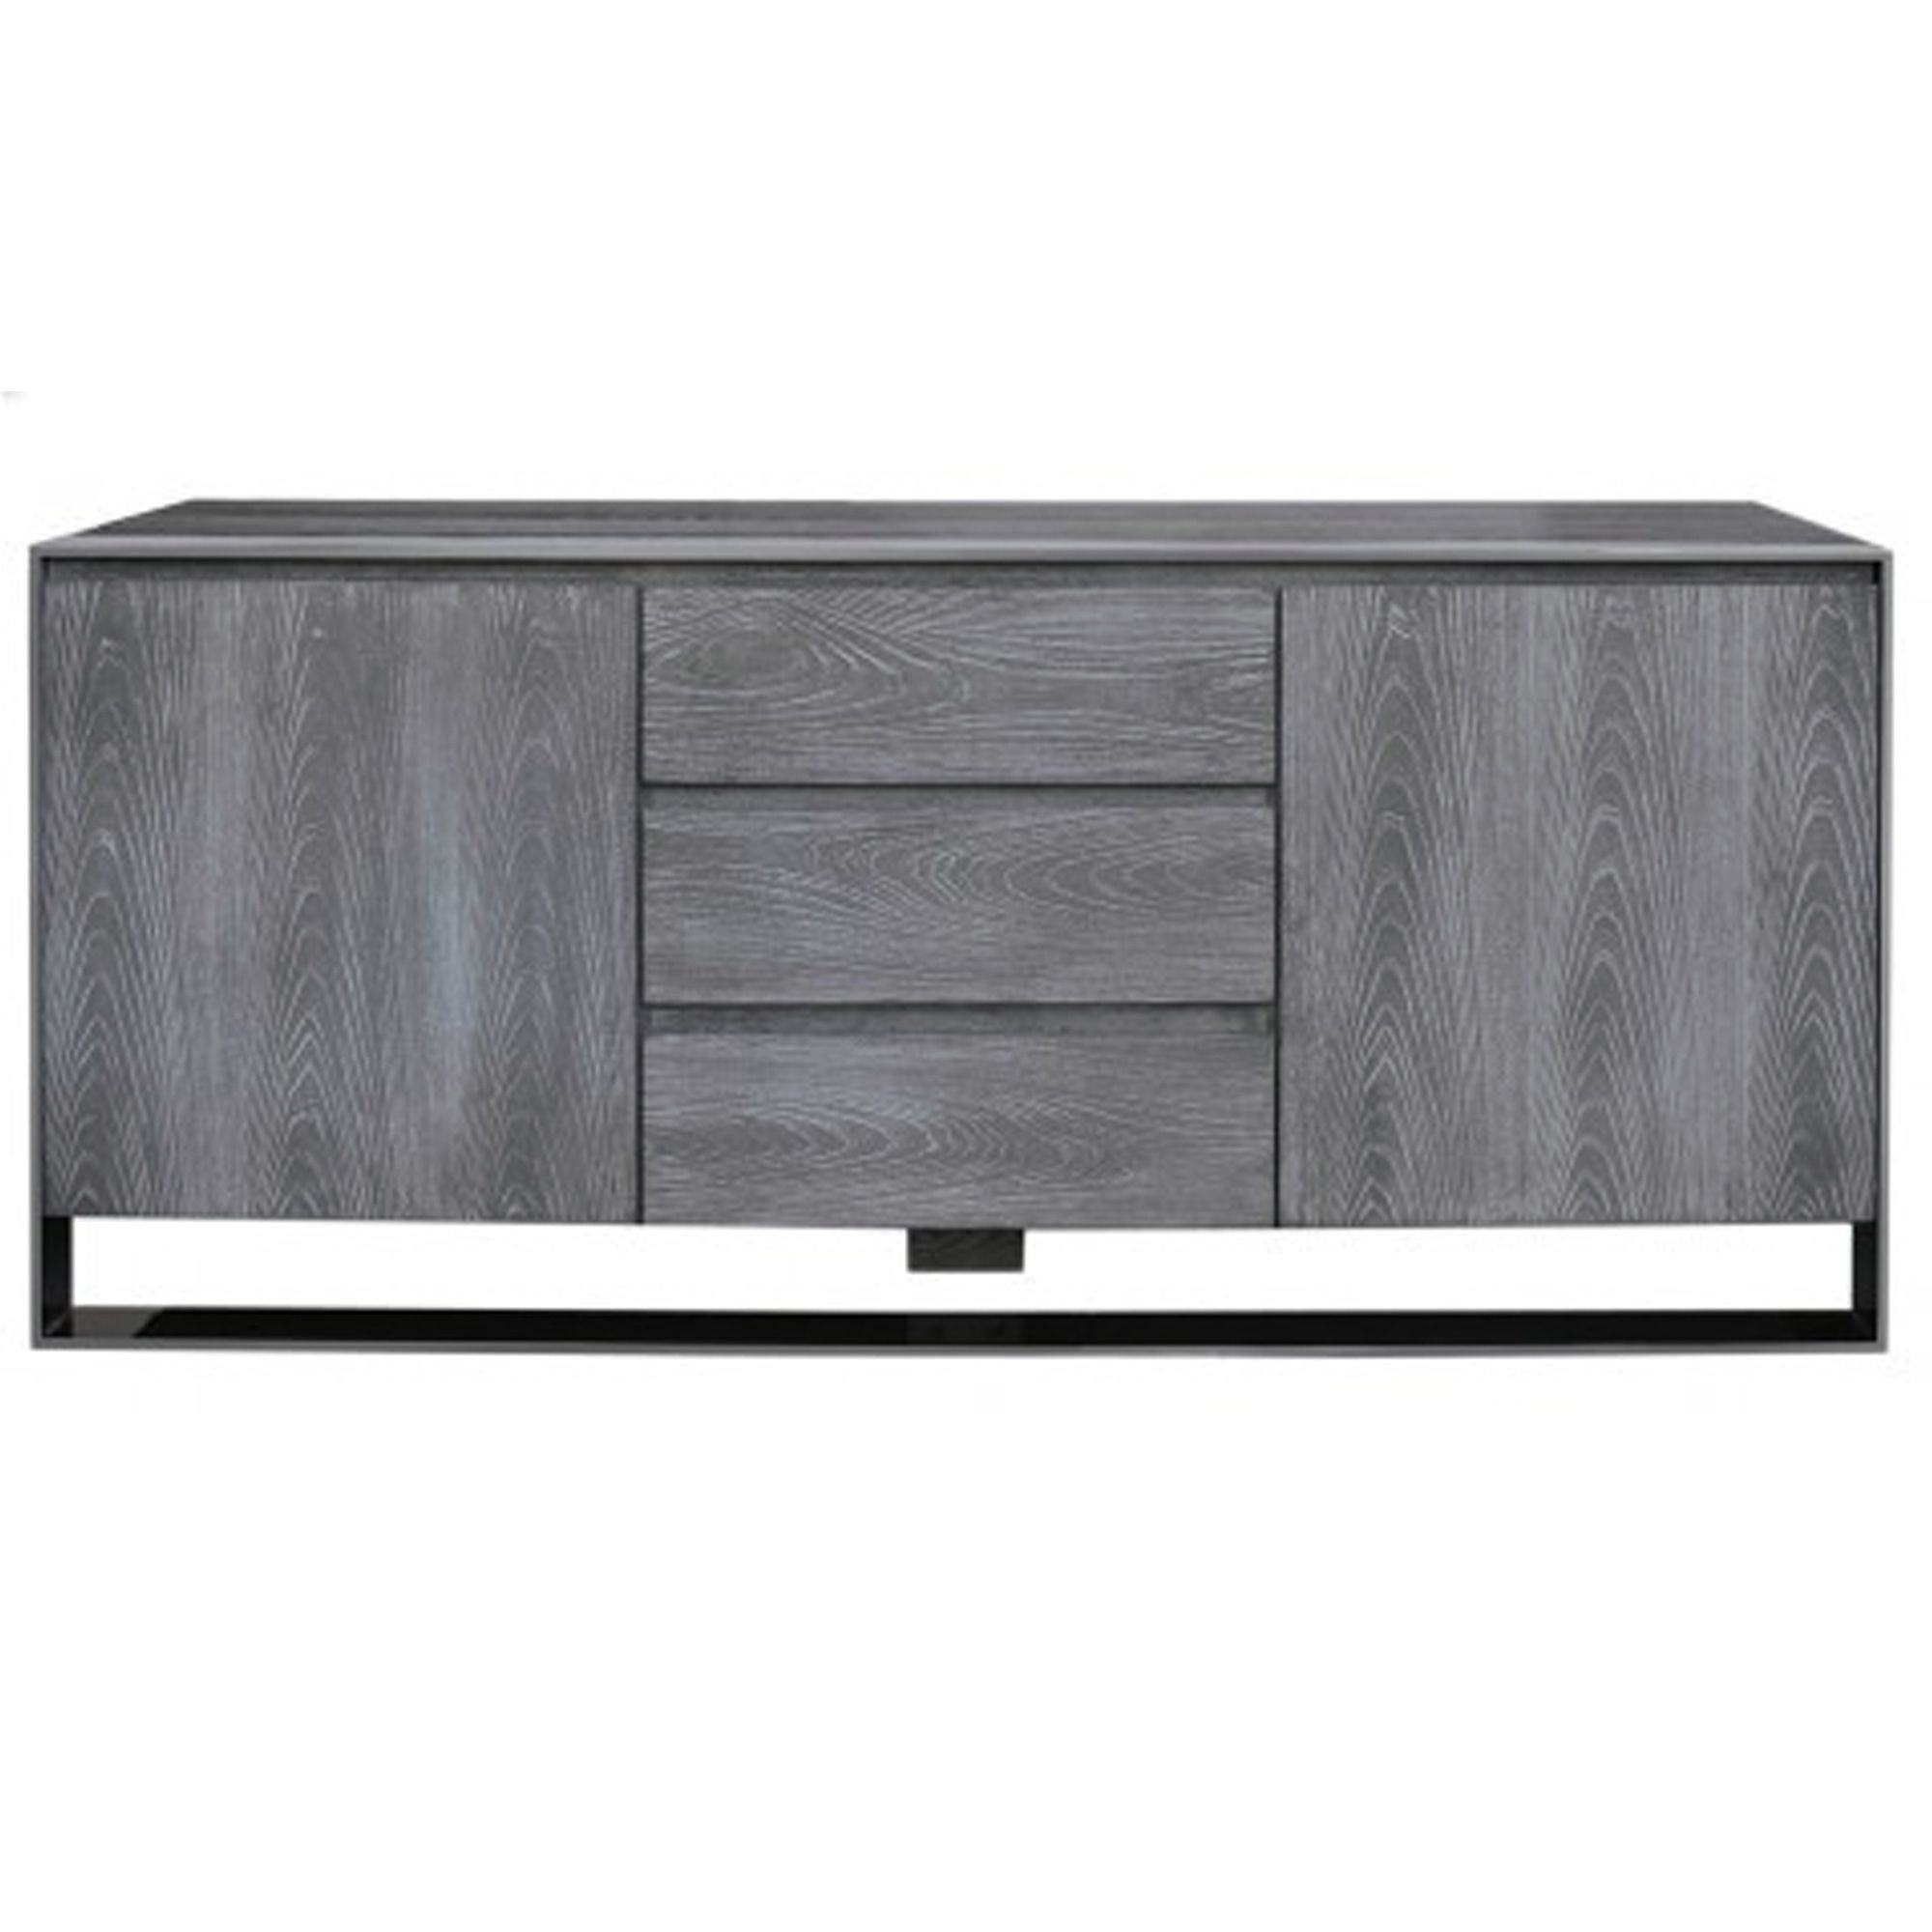 Grey Wooden Sideboard | Wooden Furniture | Sideboards Pertaining To Gray Wooden Sideboards (View 7 of 20)